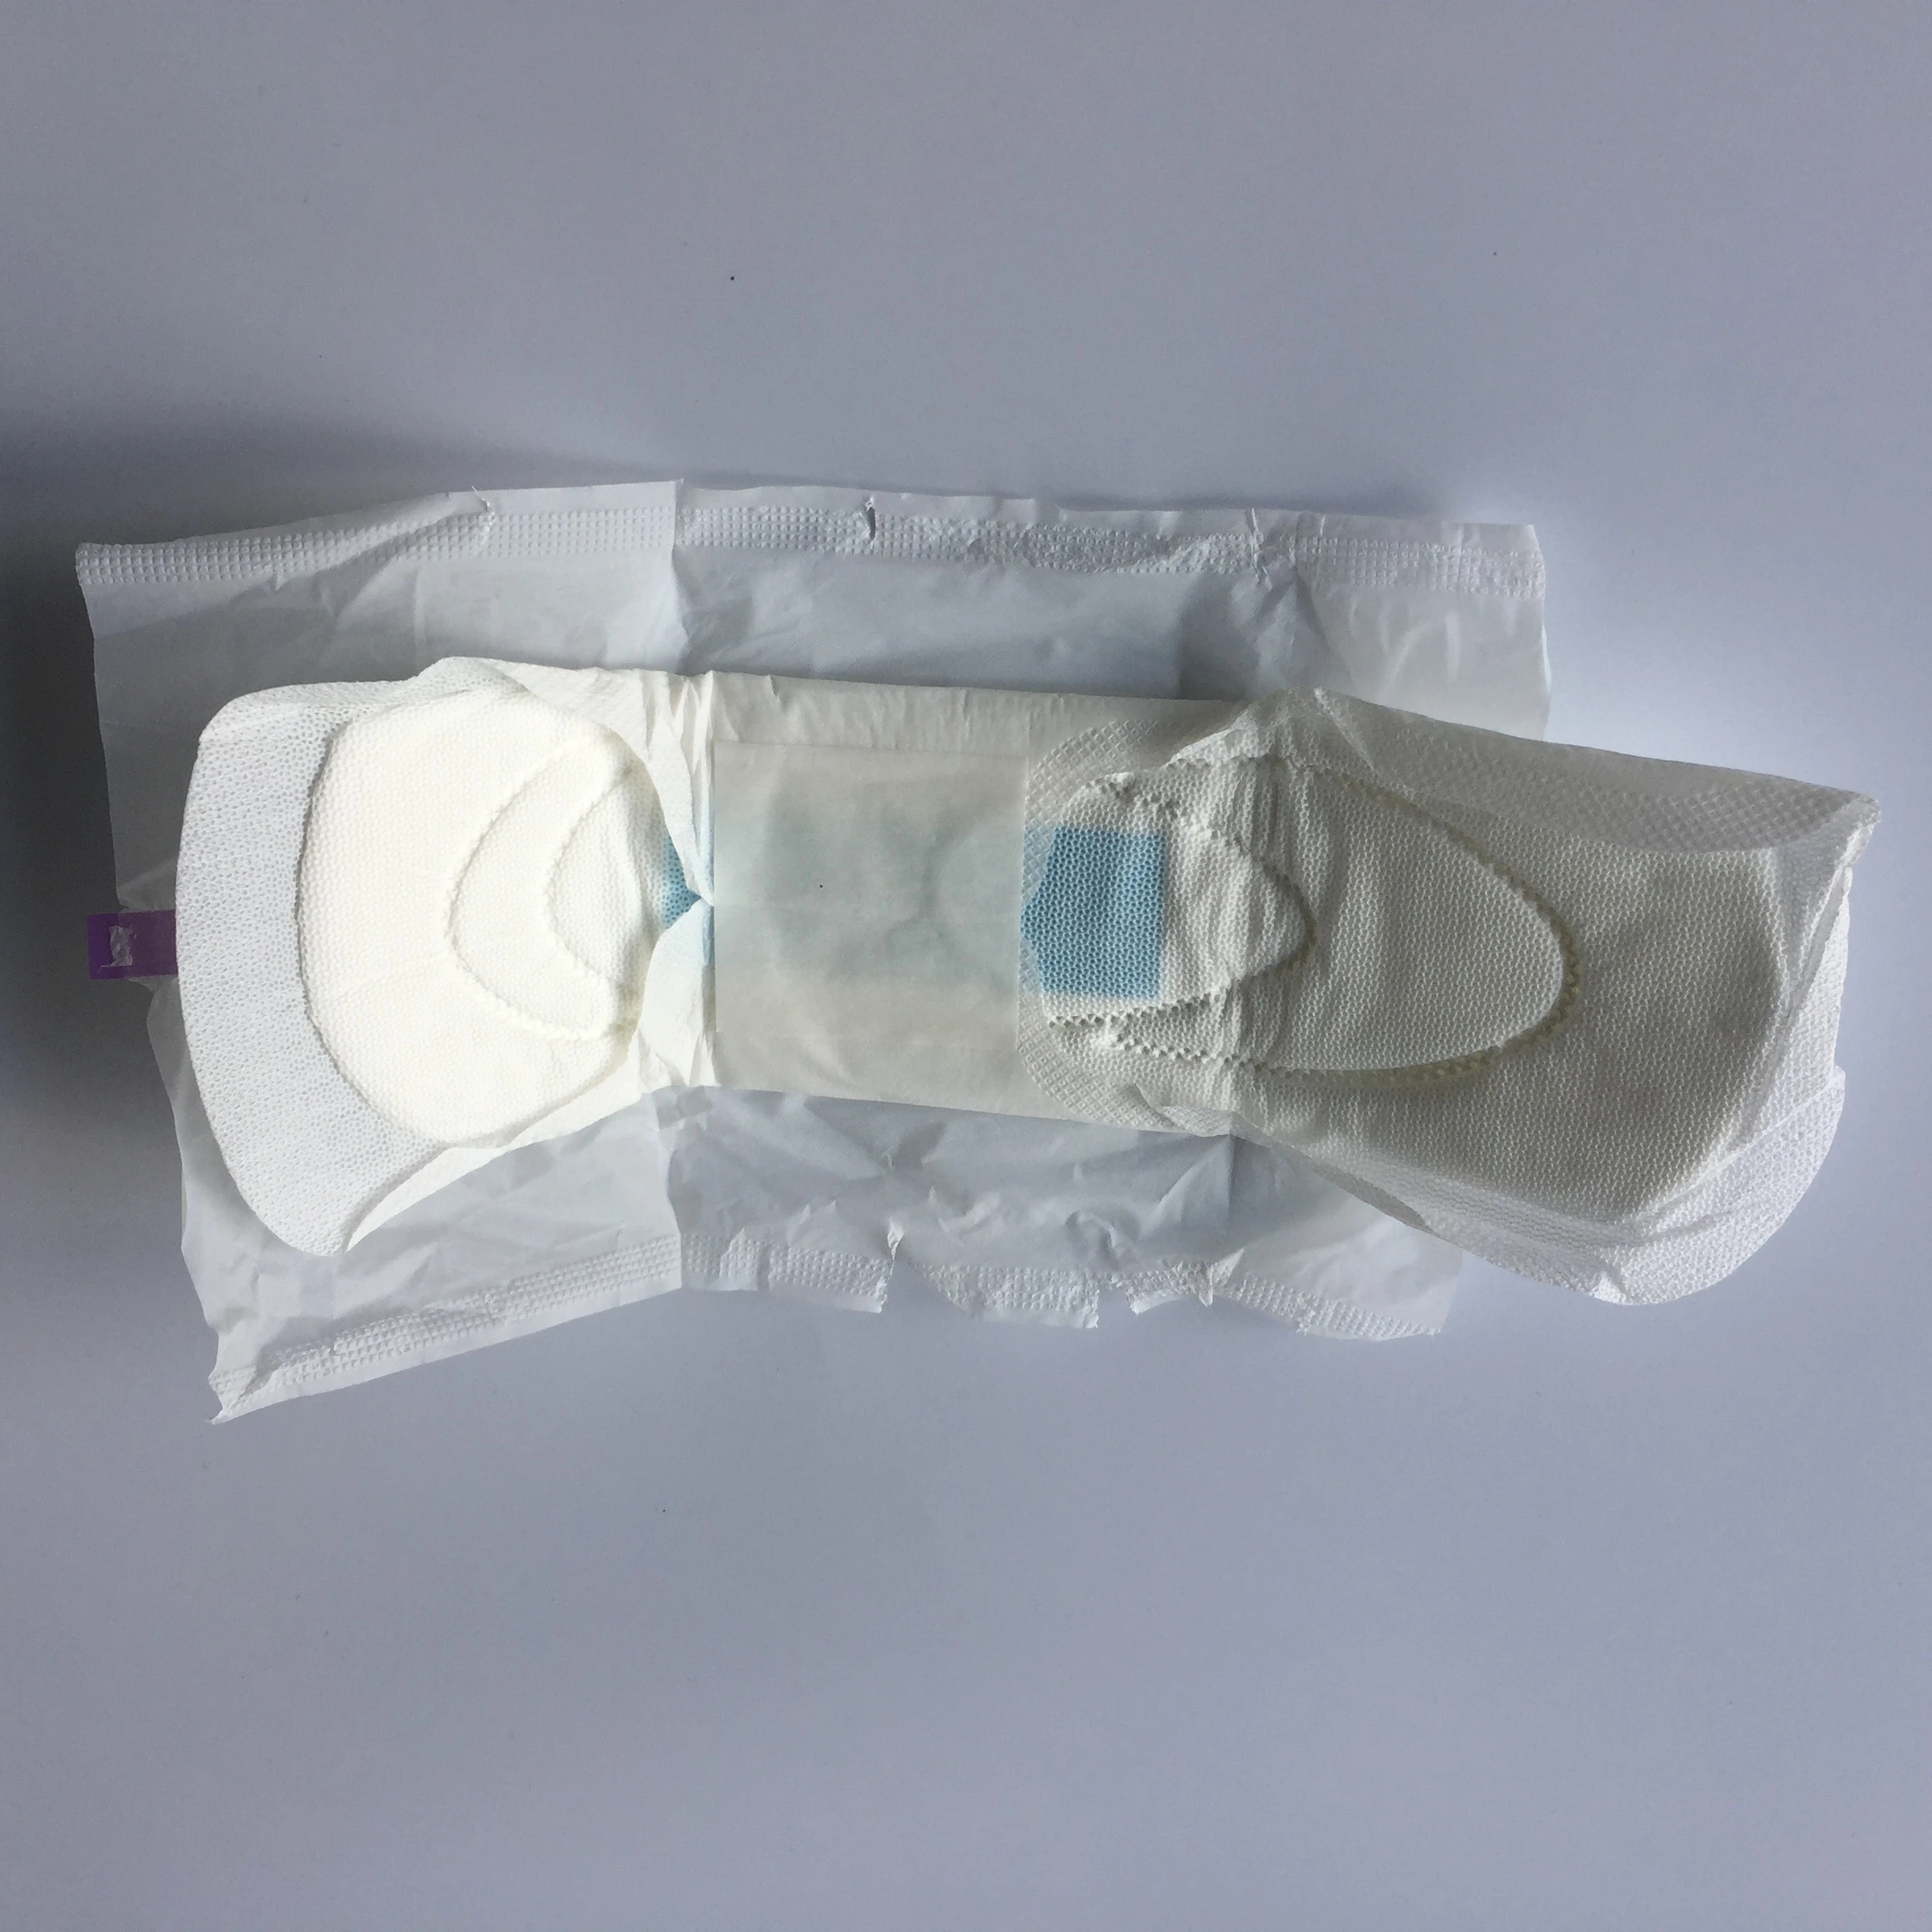 8PCS SAP PAPER SUPER THIN DISPOSABLE SANITARY NAPKIN WITH HIGH QUALITY AND HIGH ABSORBENCY